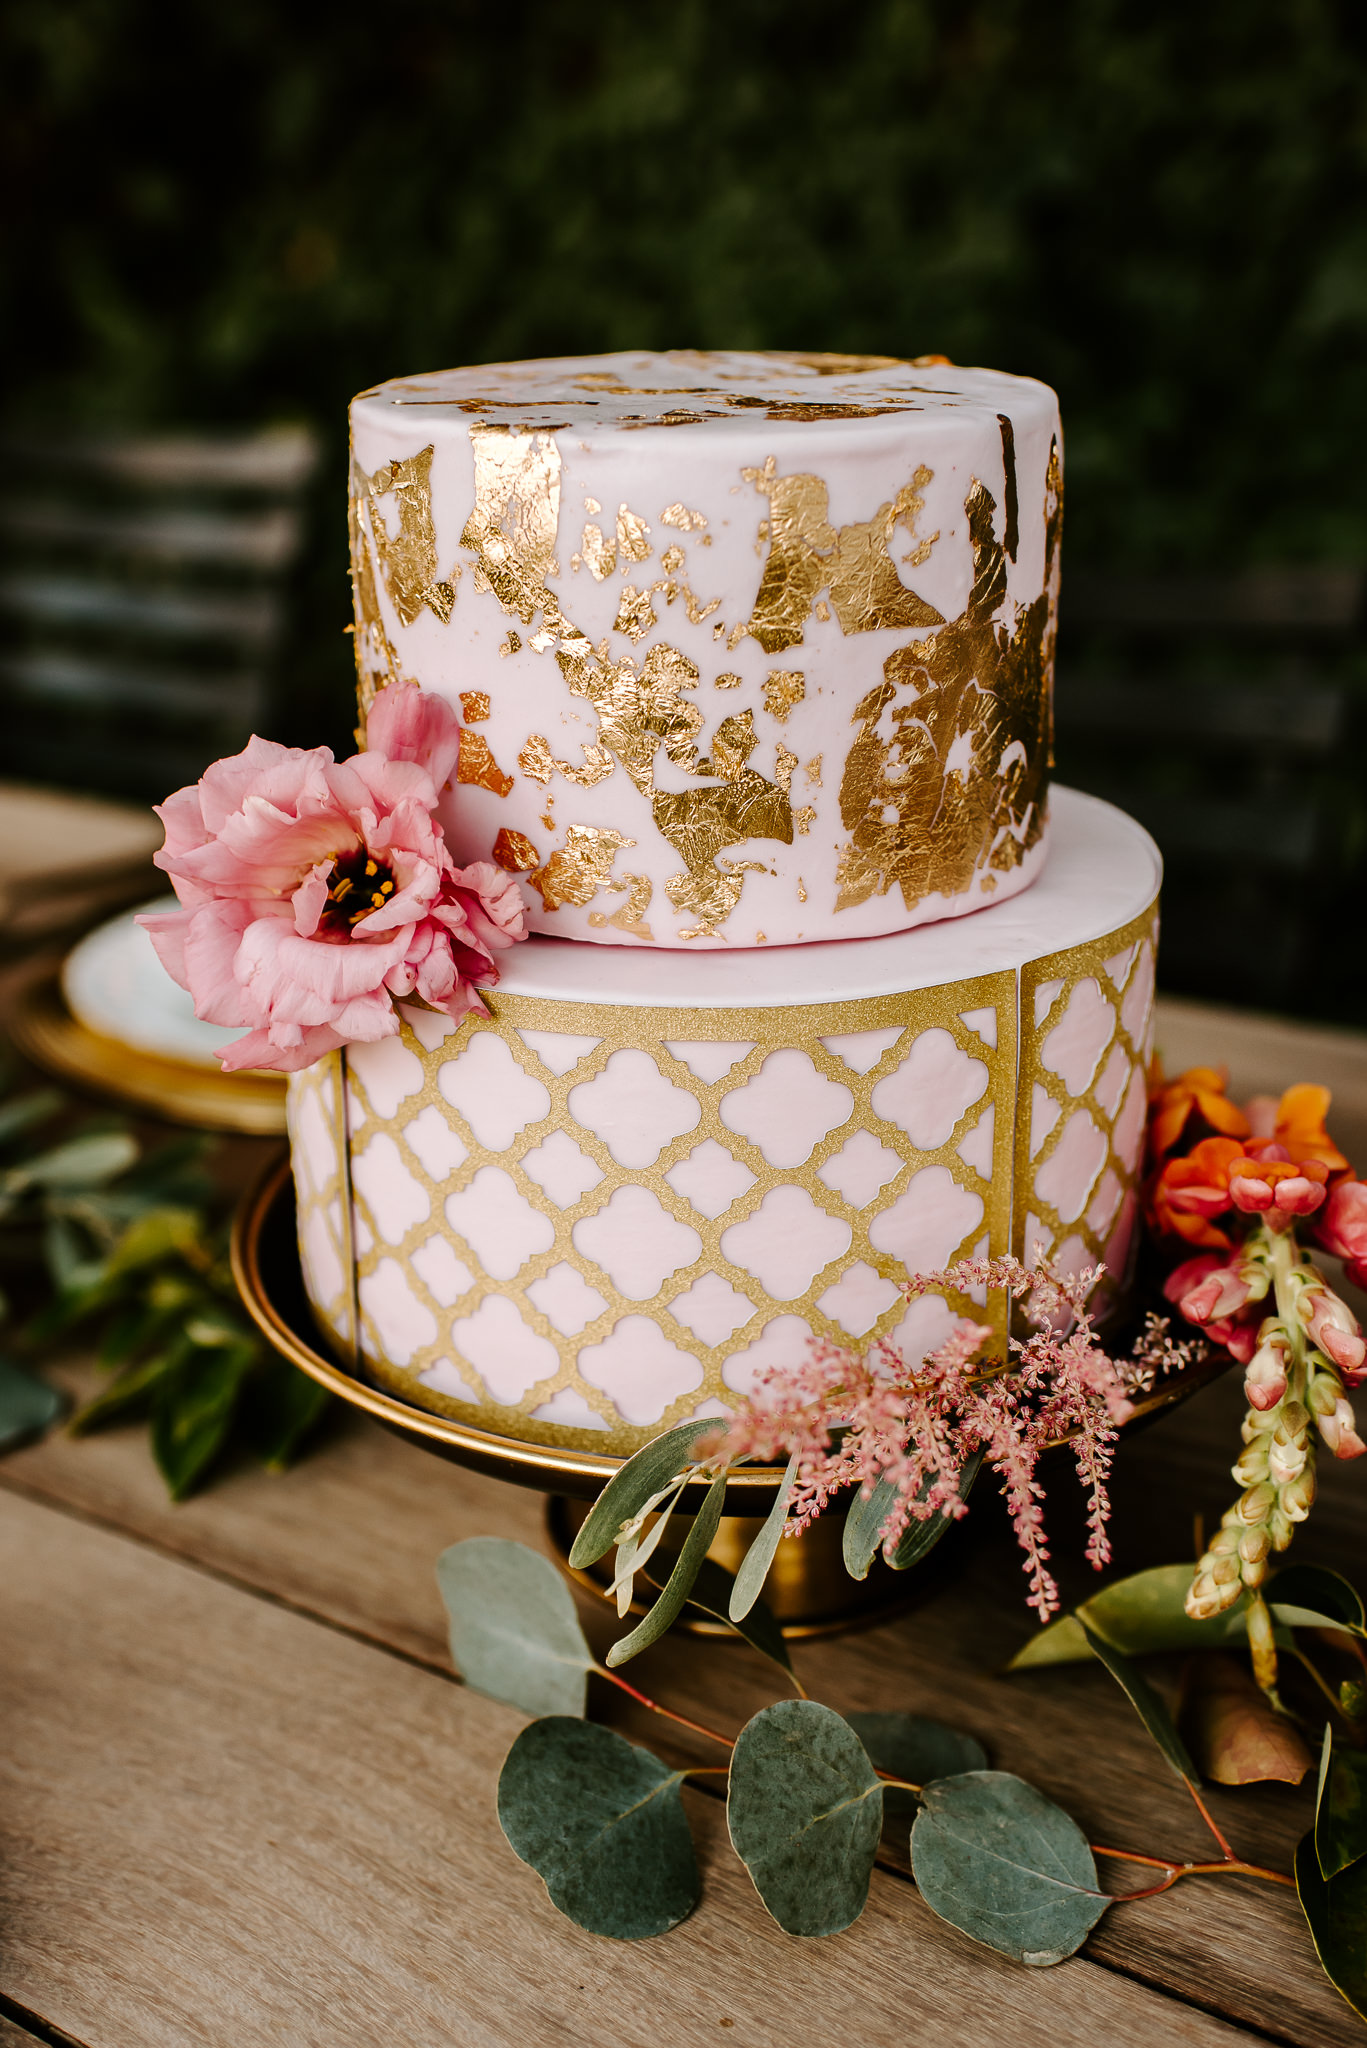 A wedding cake to celebrate a couples elopement ceremony.